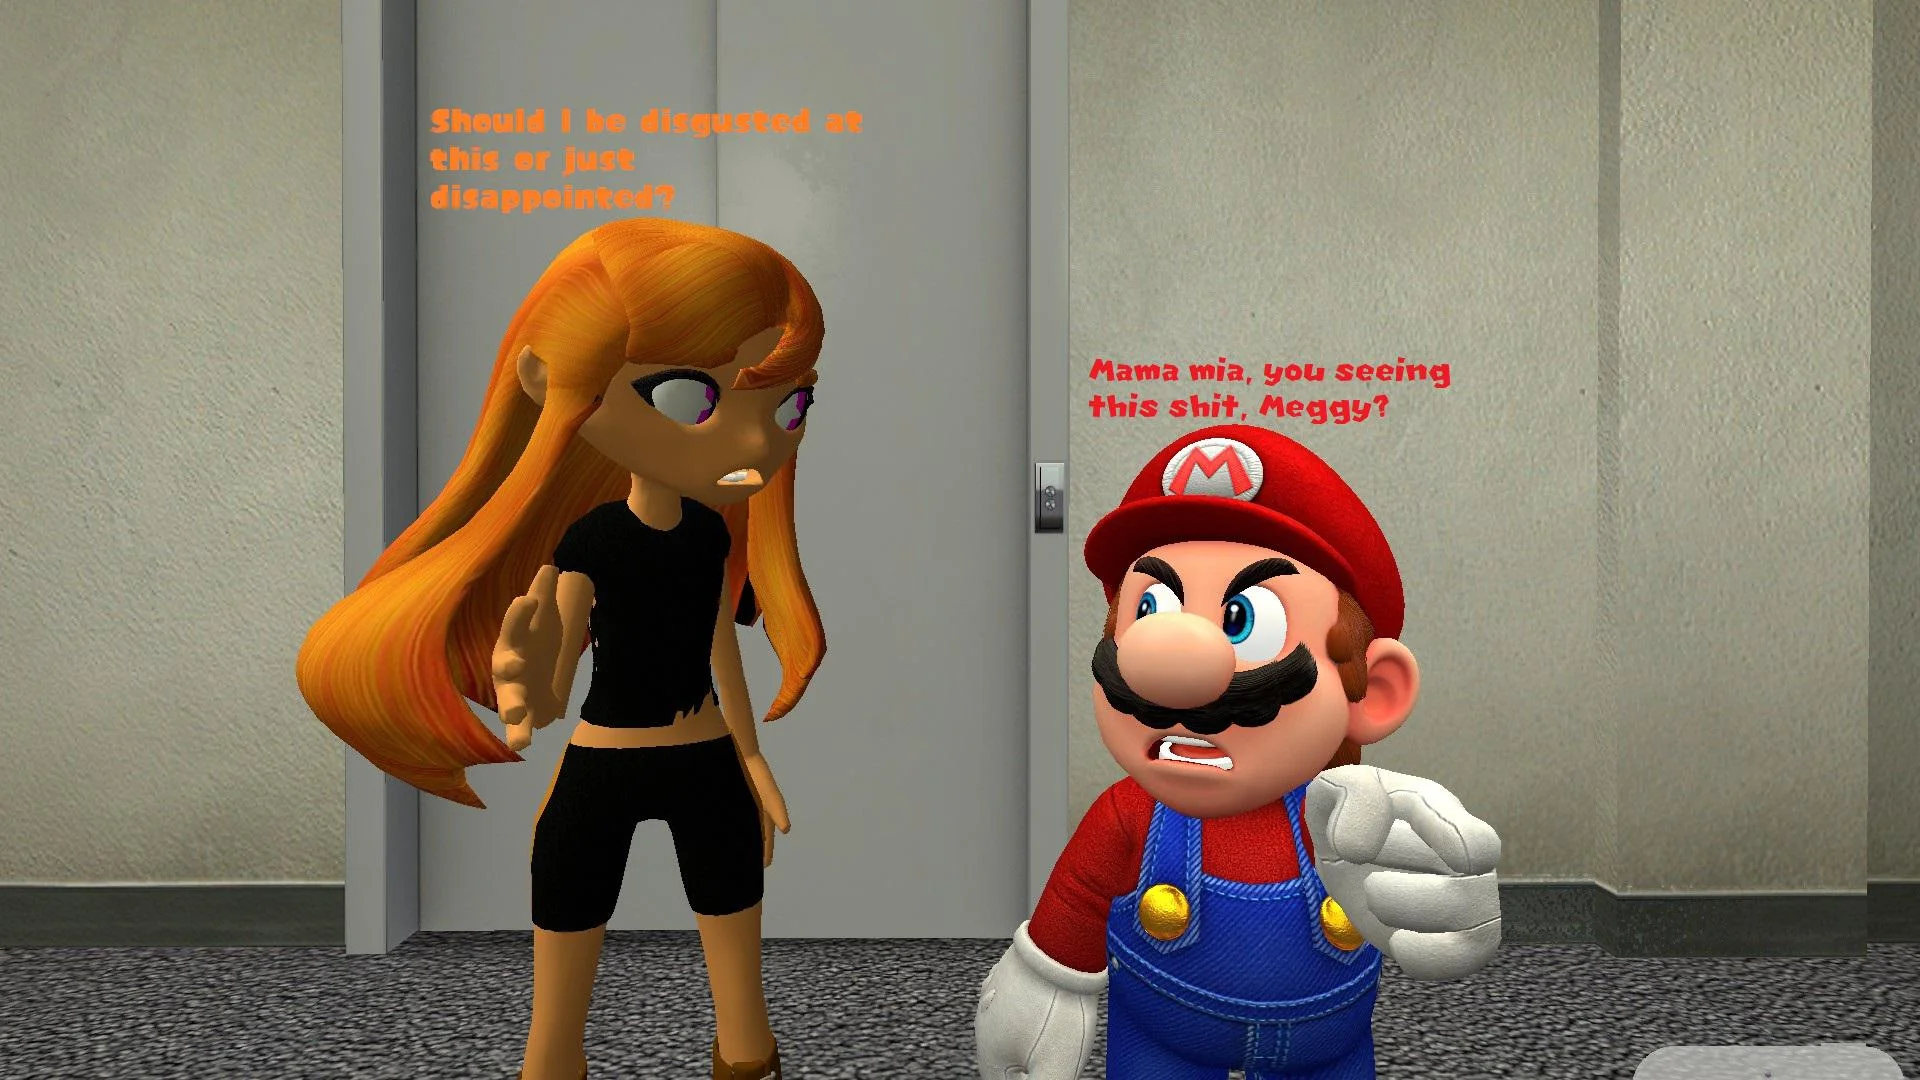 High Quality Mario and Meggy saw something really horrible Blank Meme Template